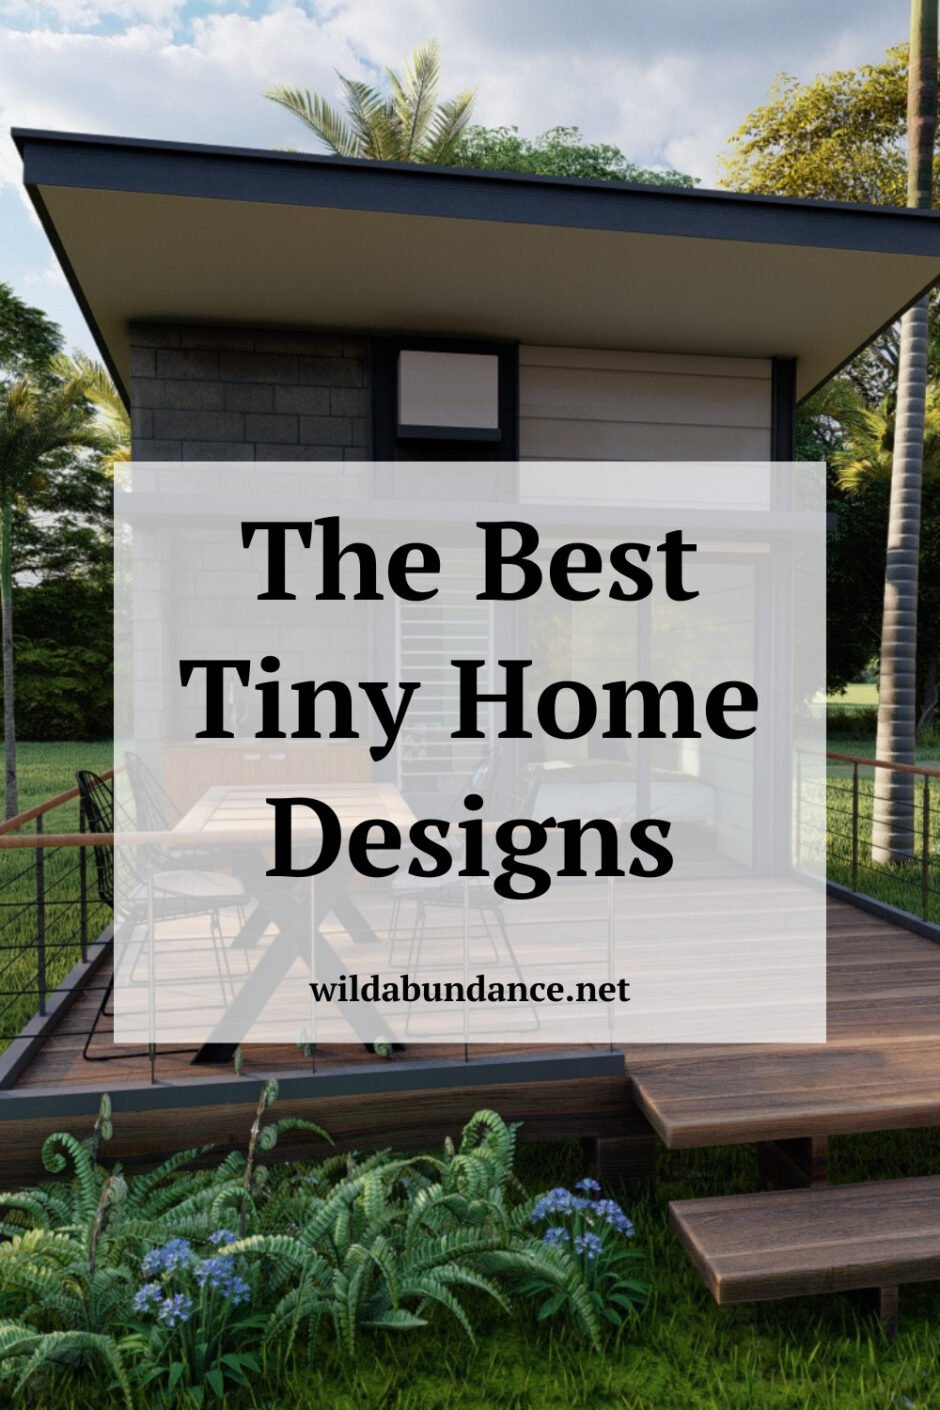 Text reads: The best tiny home designs. Photo in background is of modern, tiny house